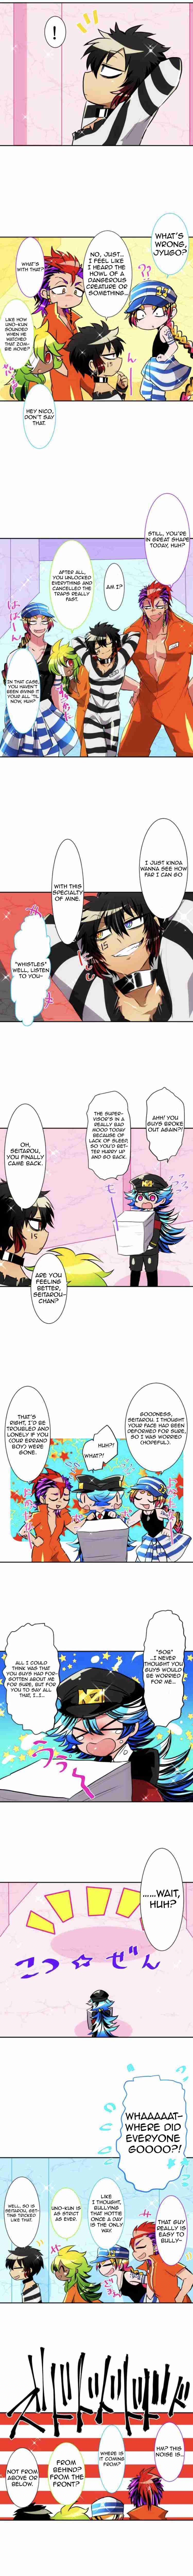 Nanbaka Ch. 147 Commencing Part 3!! A Break Is Impossible?!